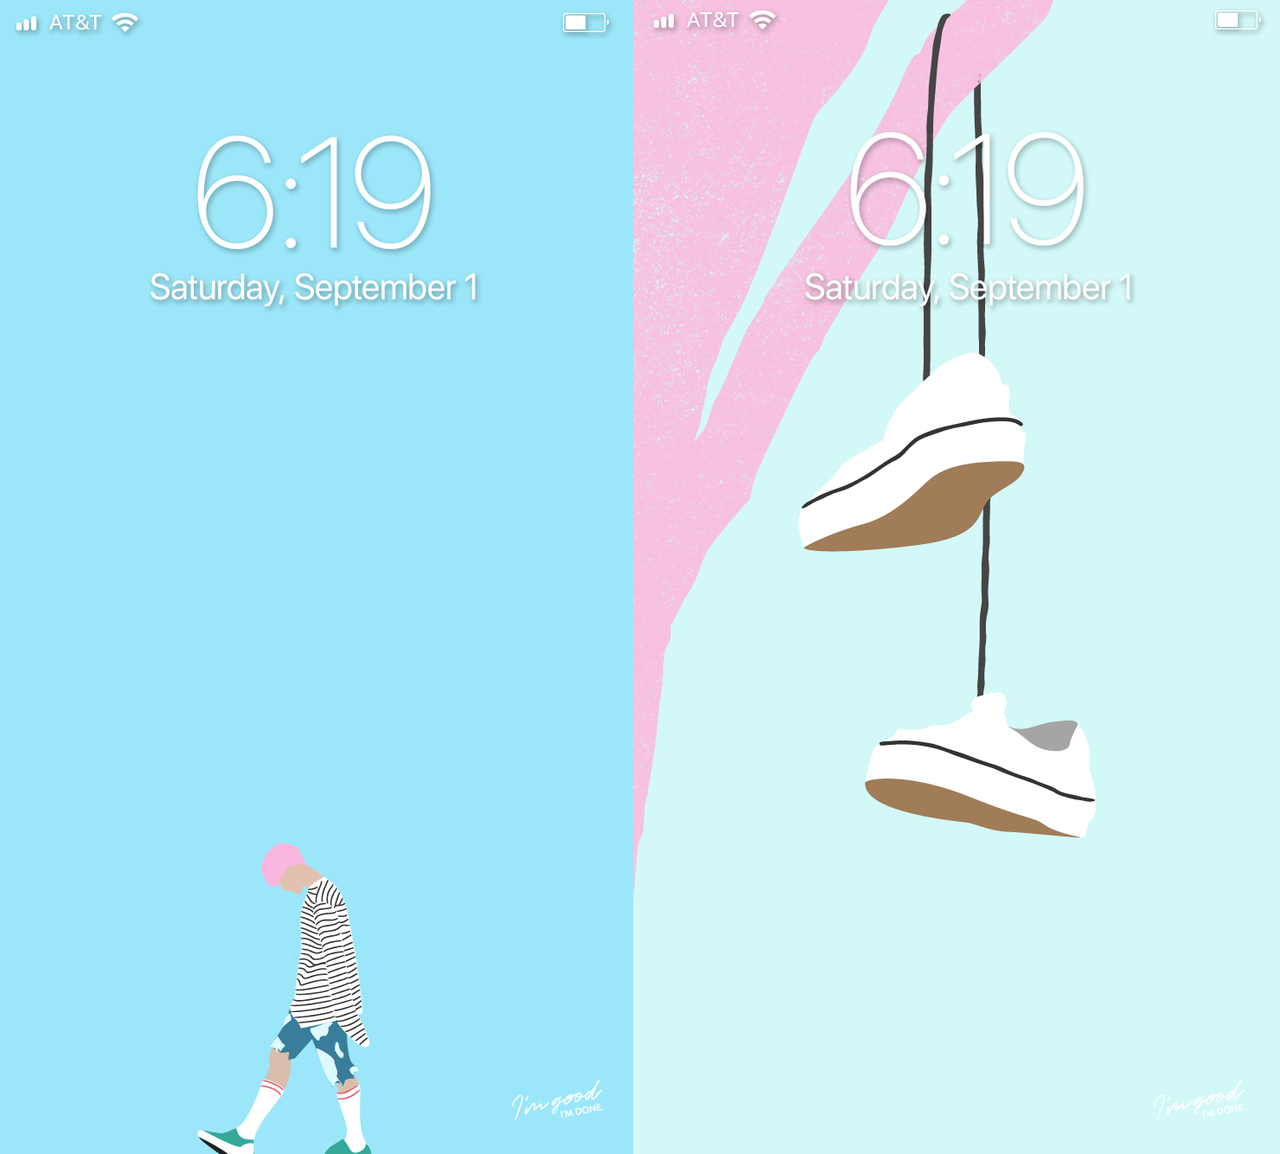 Spring Day “hey Could I Request Some Spring - Spring Day Wallpaper Bts , HD Wallpaper & Backgrounds